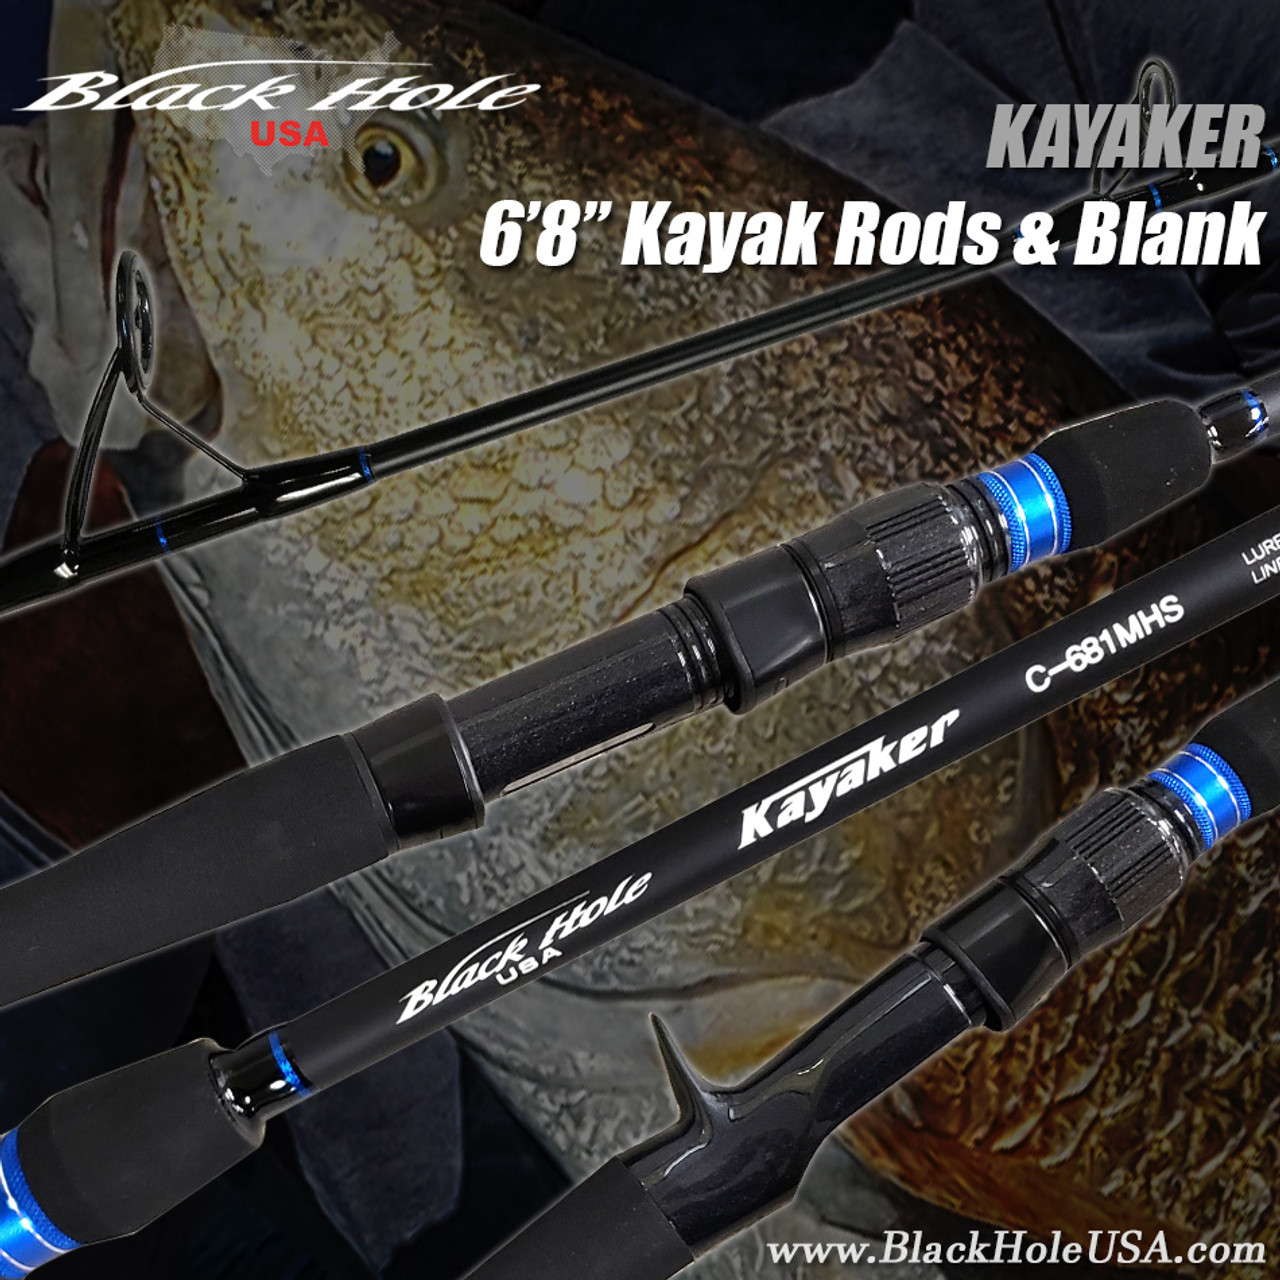 https://cdn11.bigcommerce.com/s-d32ed/images/stencil/1280w/products/788/3940/black_hole_kayaker_rod_blank_front_bhusa__57612.1709220676.jpg